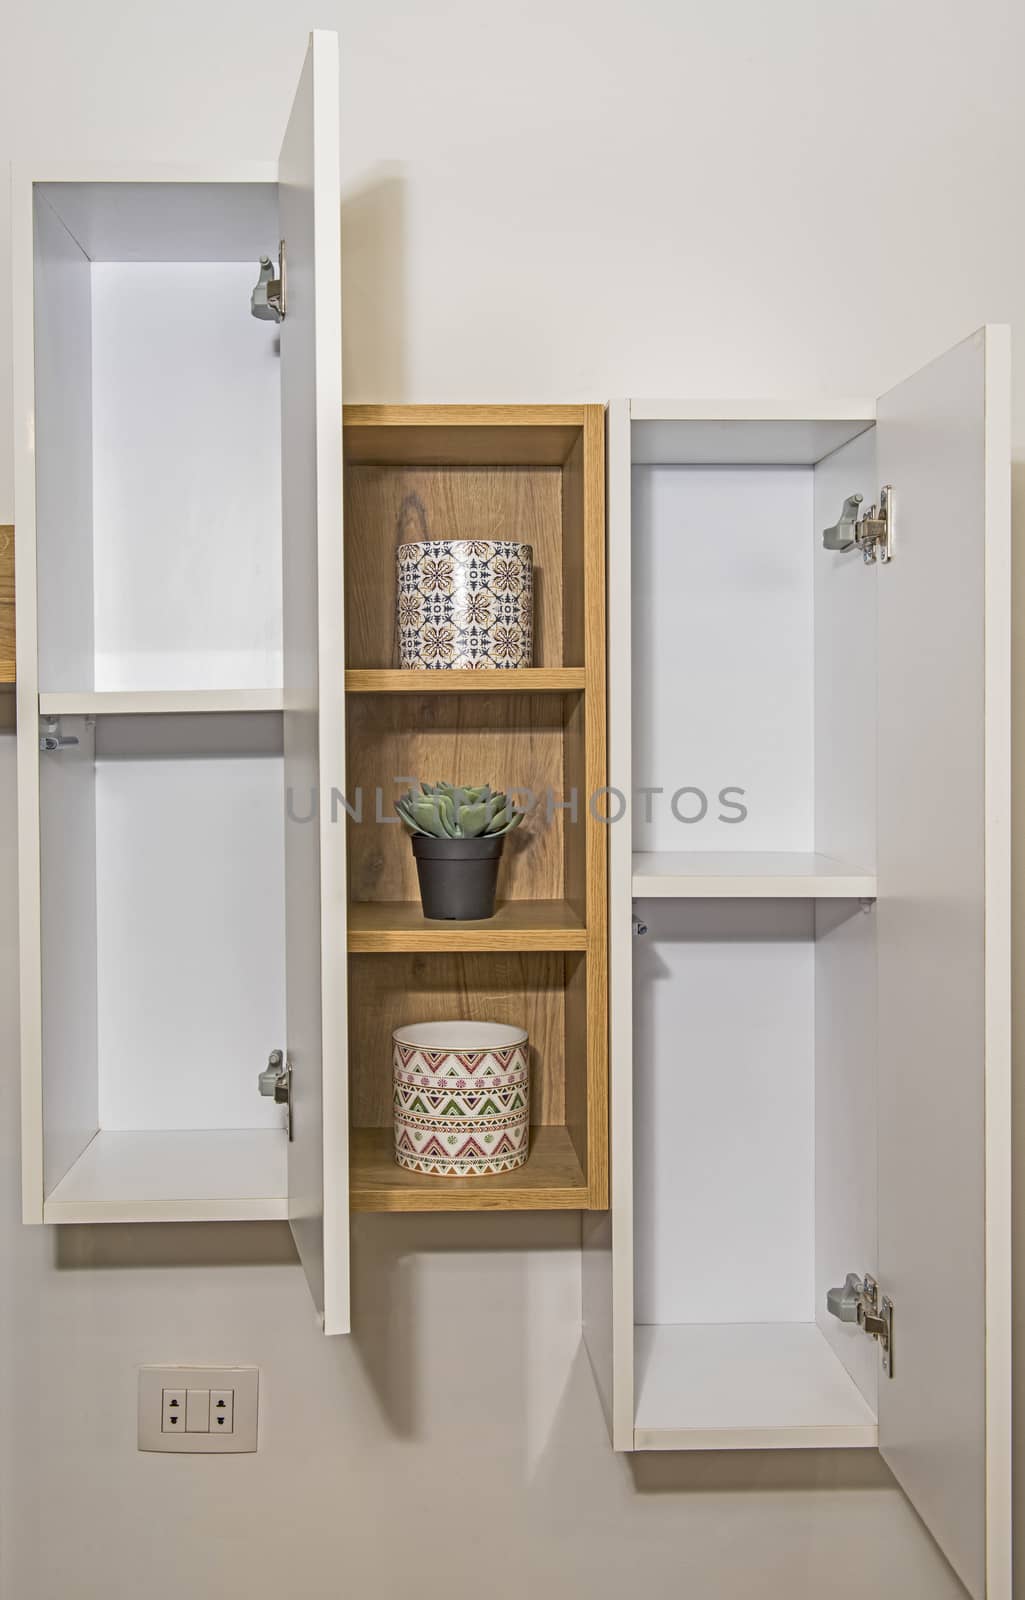 Interior design decor showing modern wooden shelf unit with cupboards in luxury apartment showroom